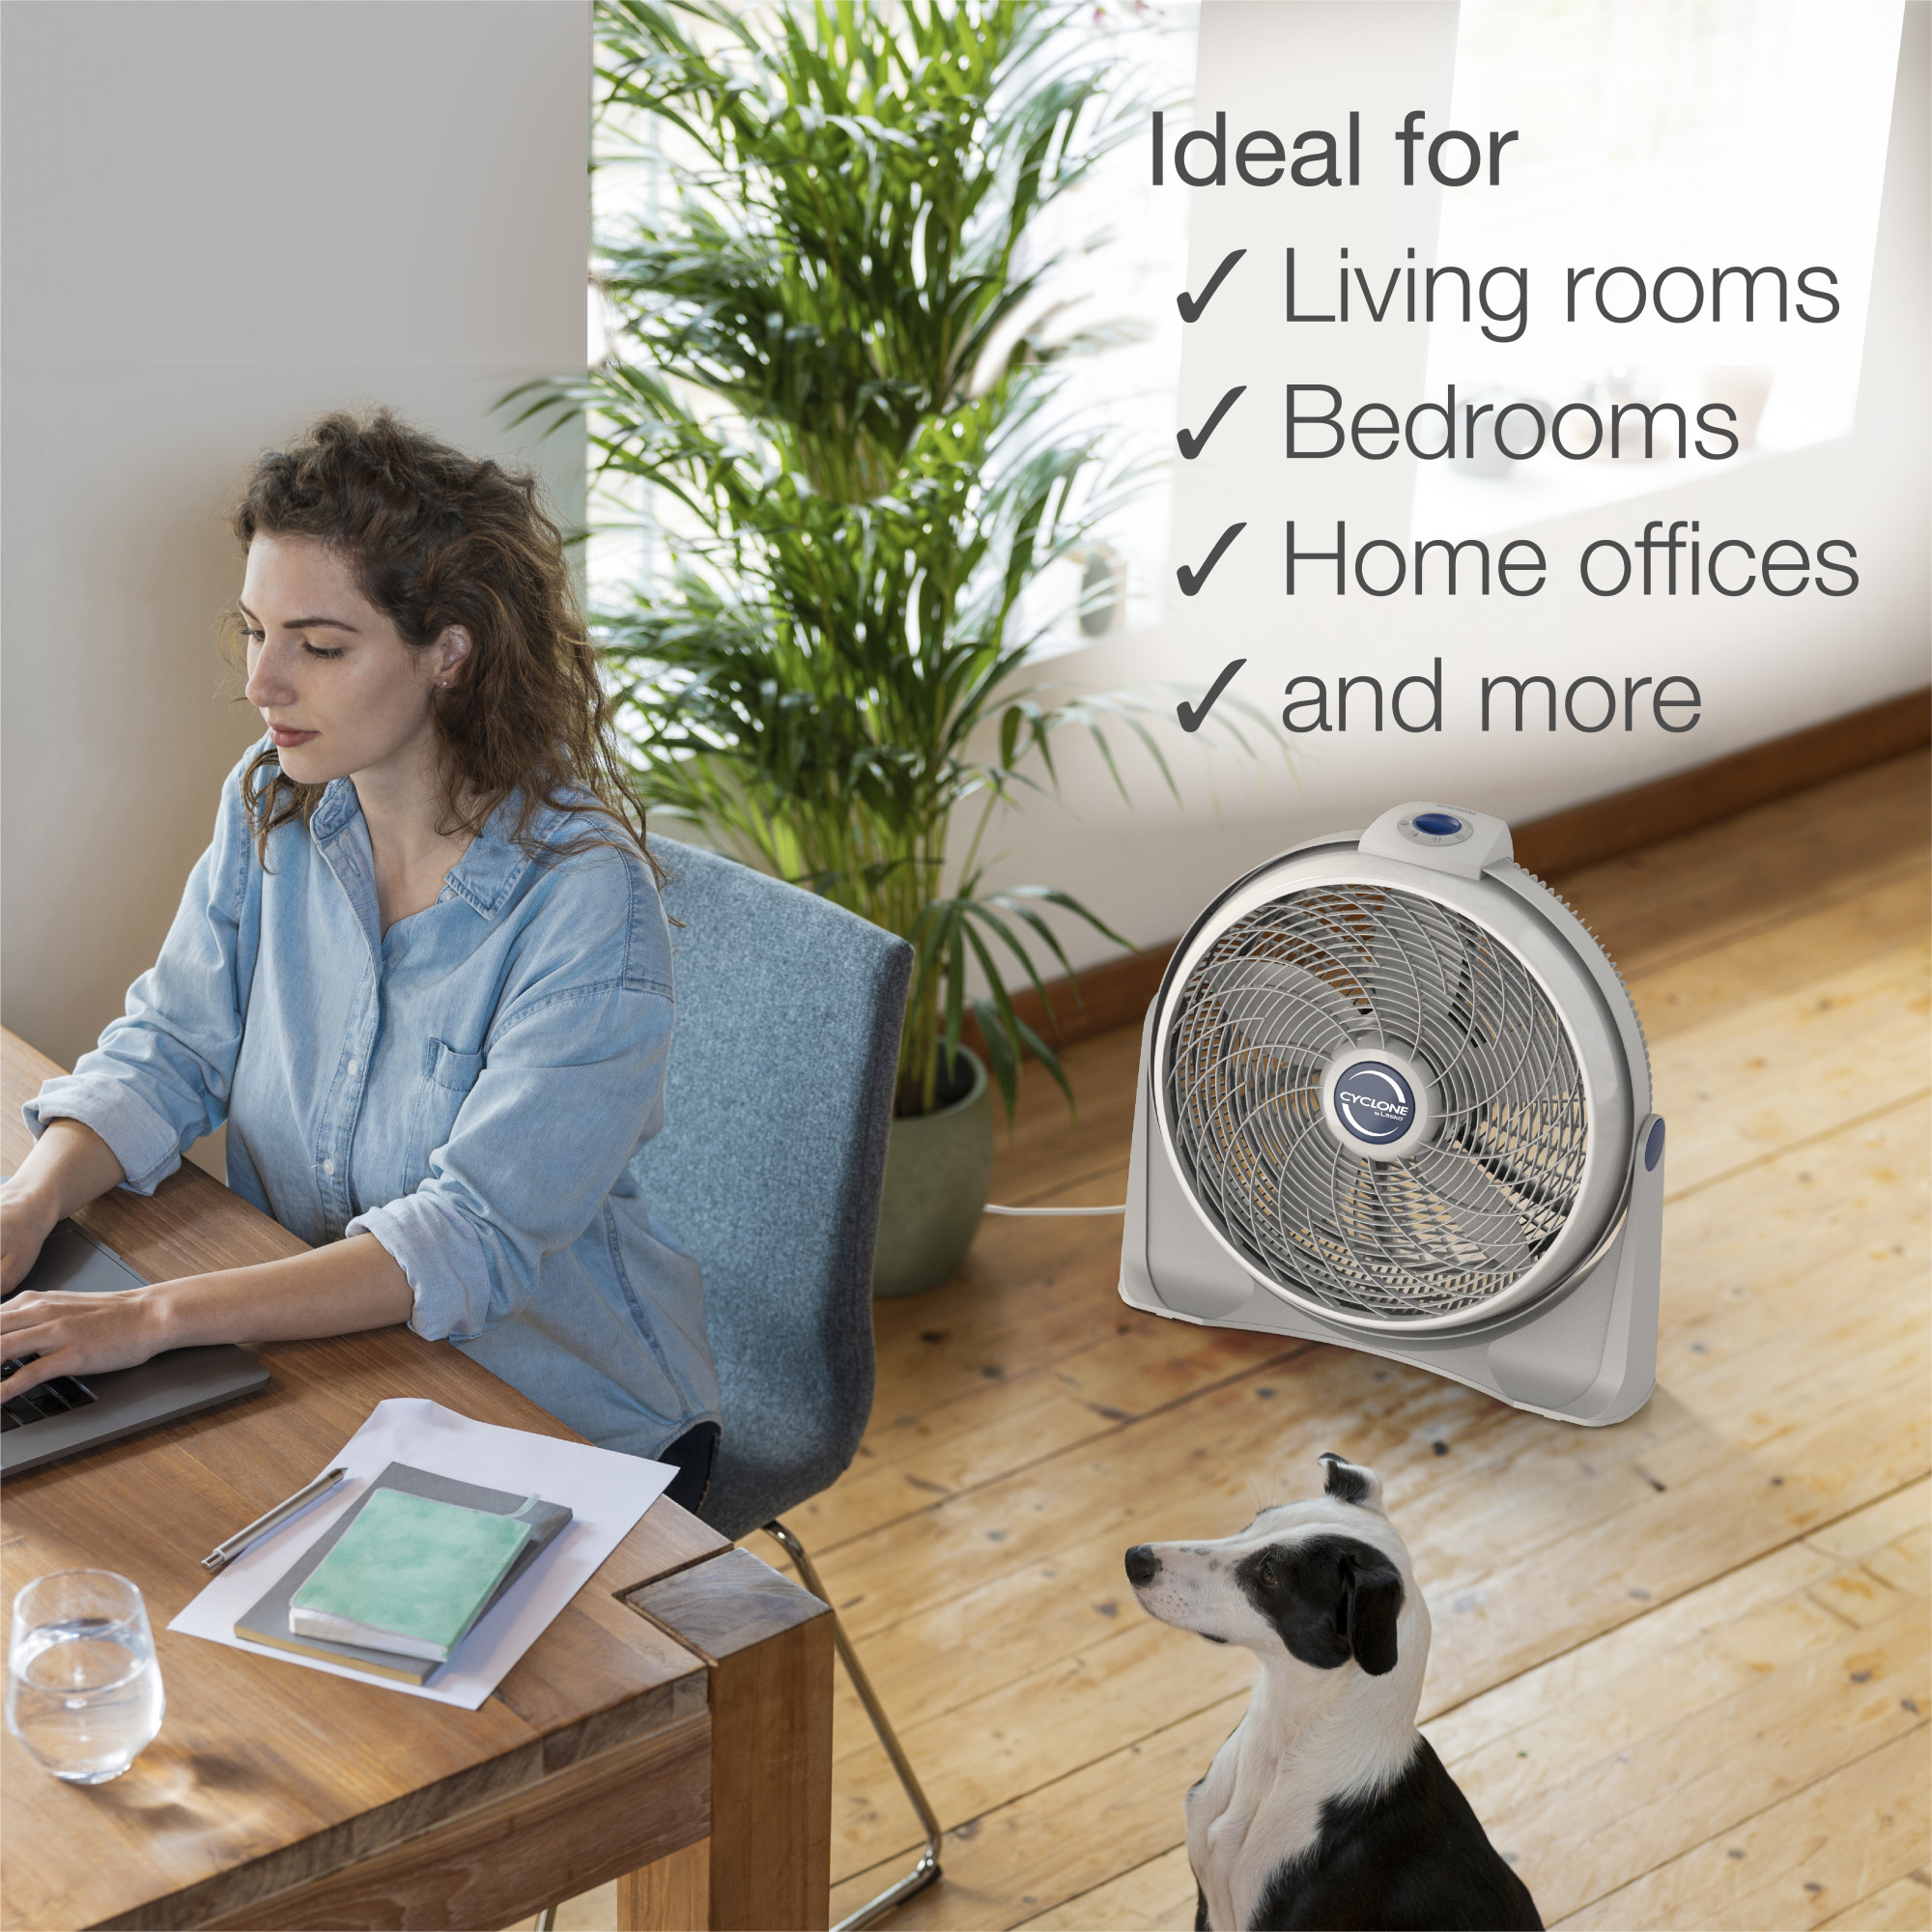 Lasko 20" Cyclone Air Circulator Floor Fan with Wall Mount Option, 23" Height, White, 3520, New - image 5 of 14